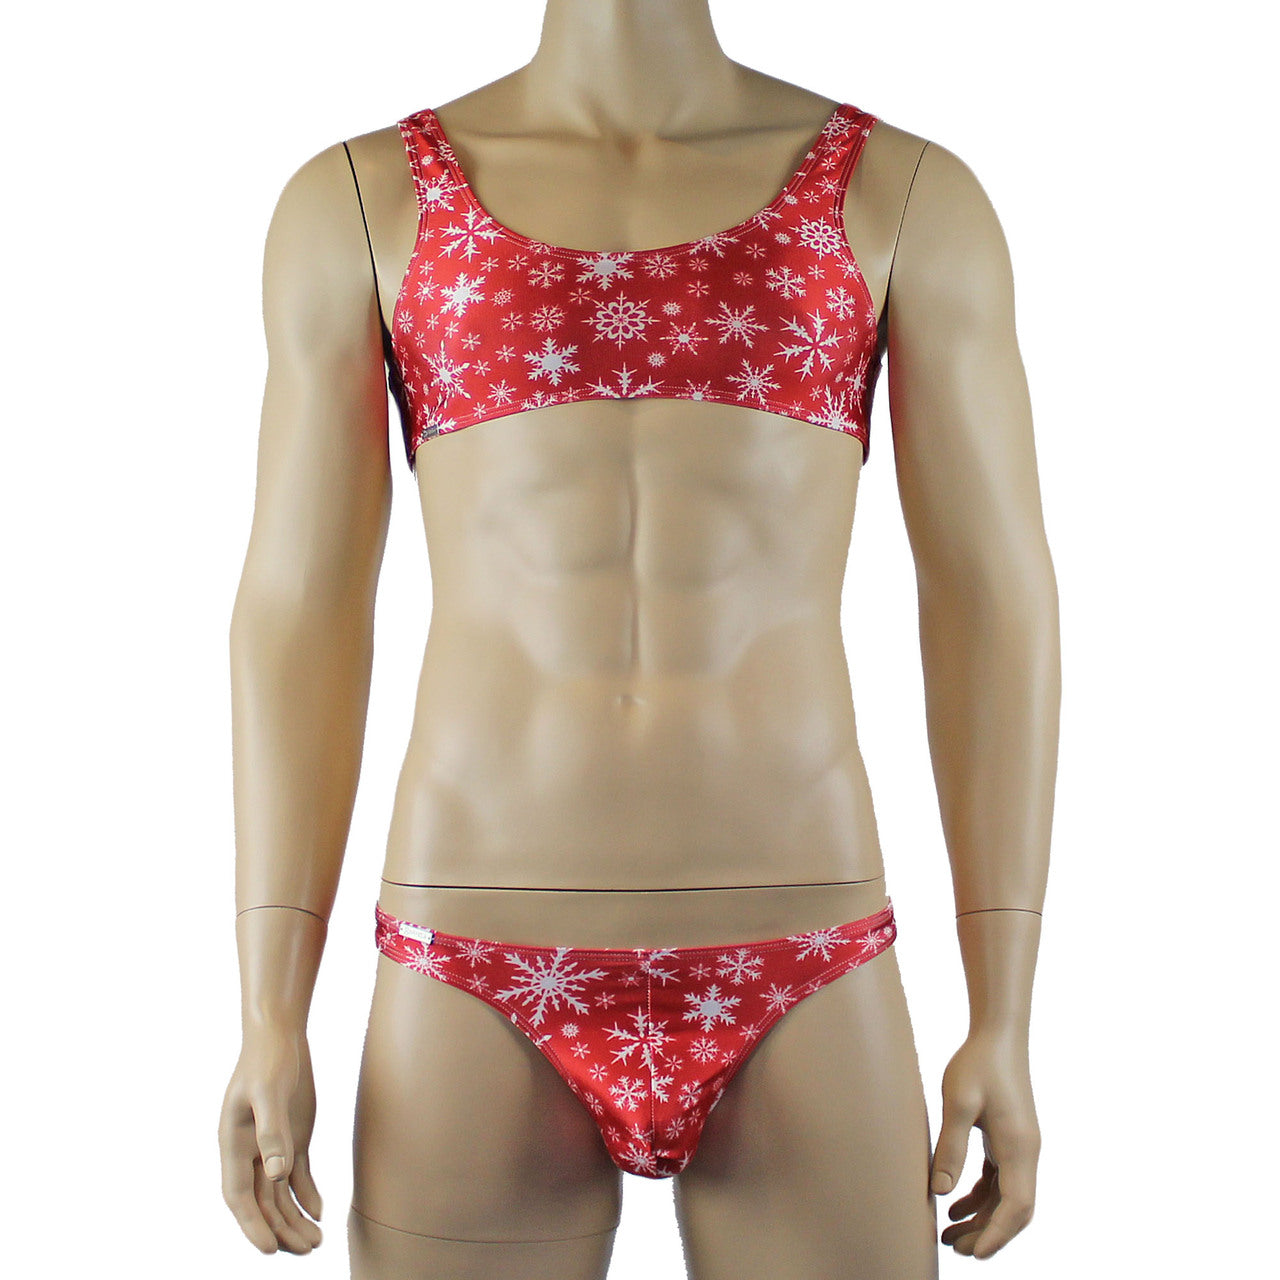 Mens Lingerie Snowflake Bra Top & Low Cut Thong Red and White